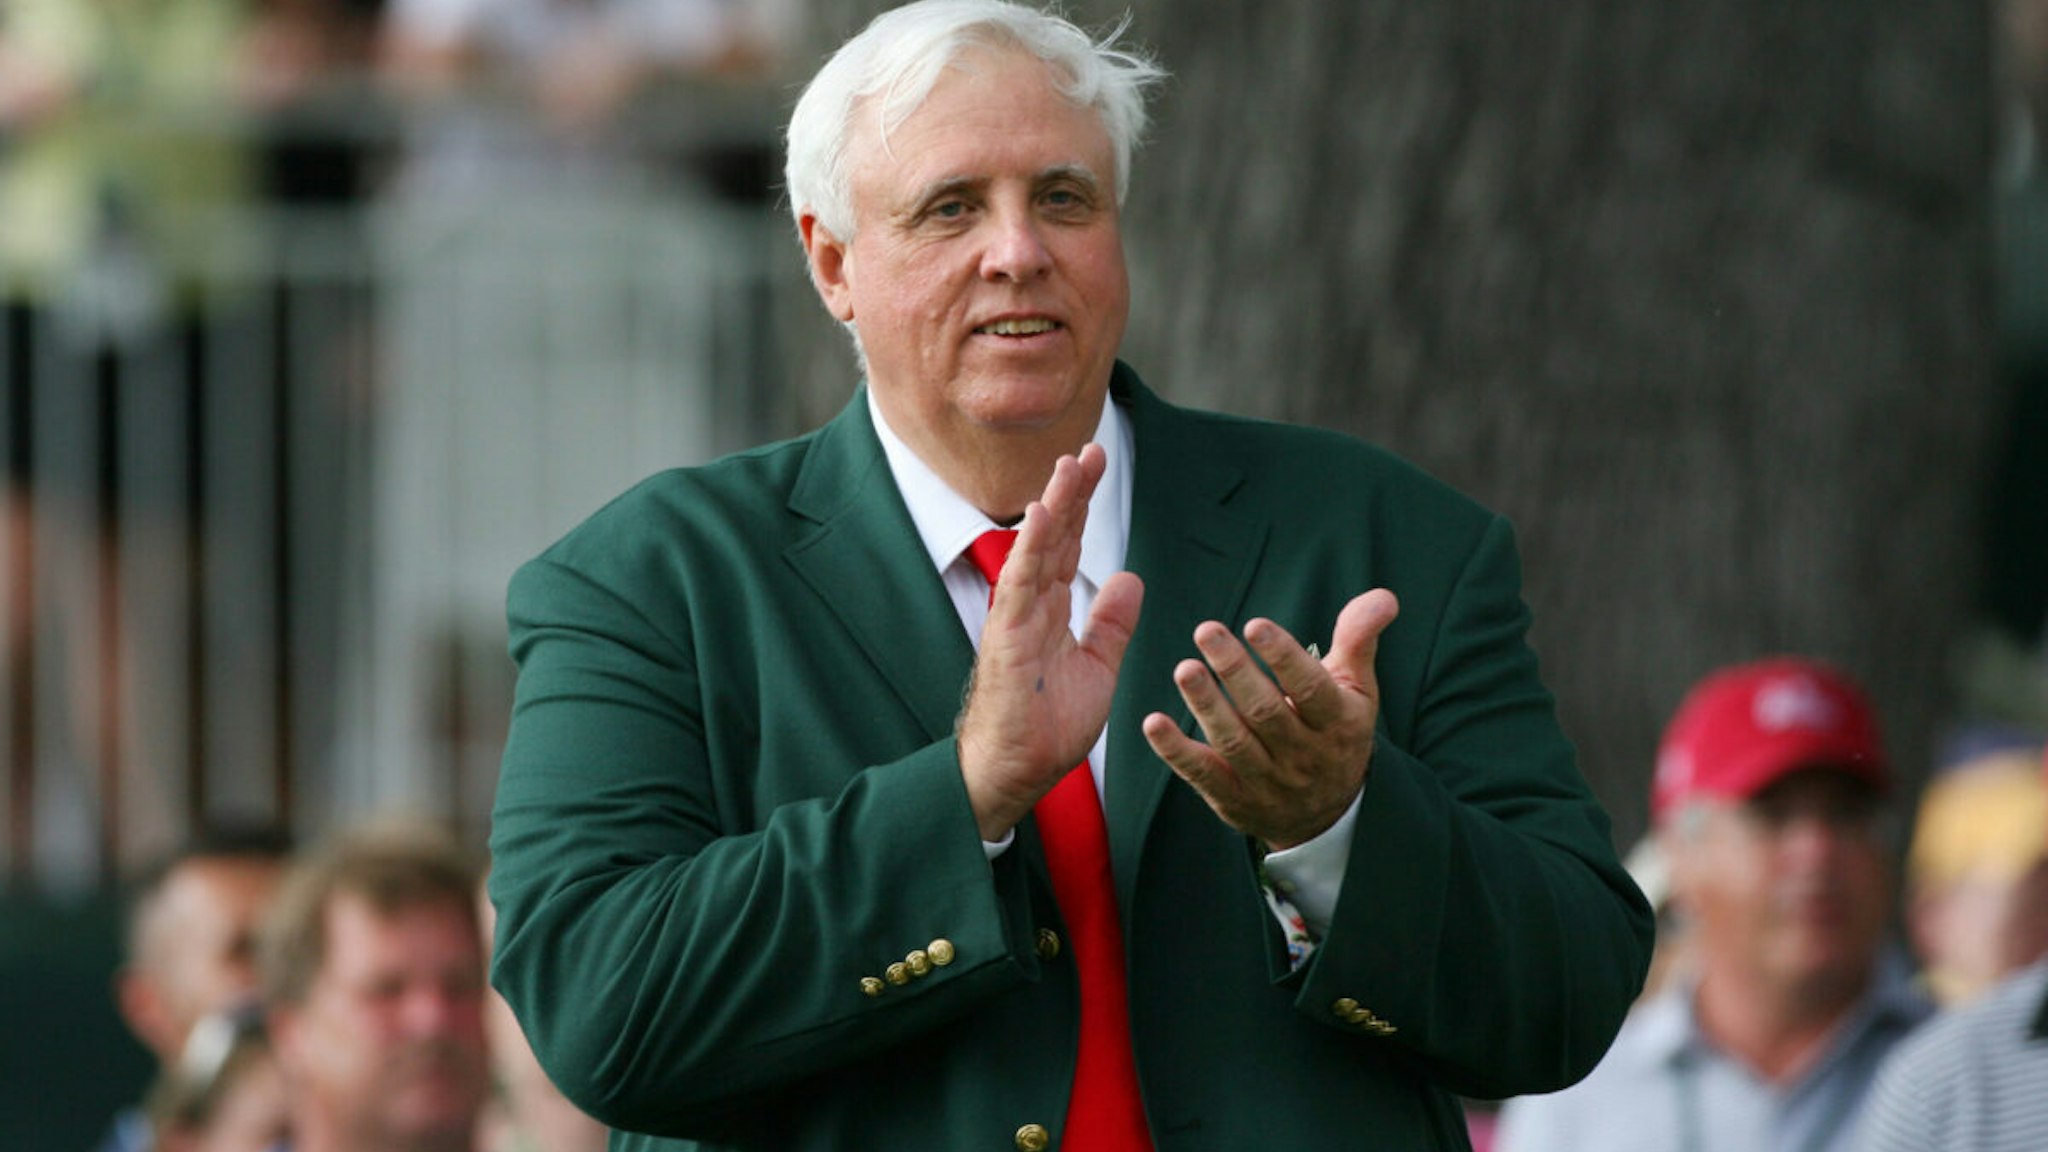 Jim Justice, owner of The Greenbrier Resort, applauds on the 18th tee during the final round of The Greenbrier Classic at The Old White TPC on July 31, 2011 in White Sulphur Springs, West Virginia.